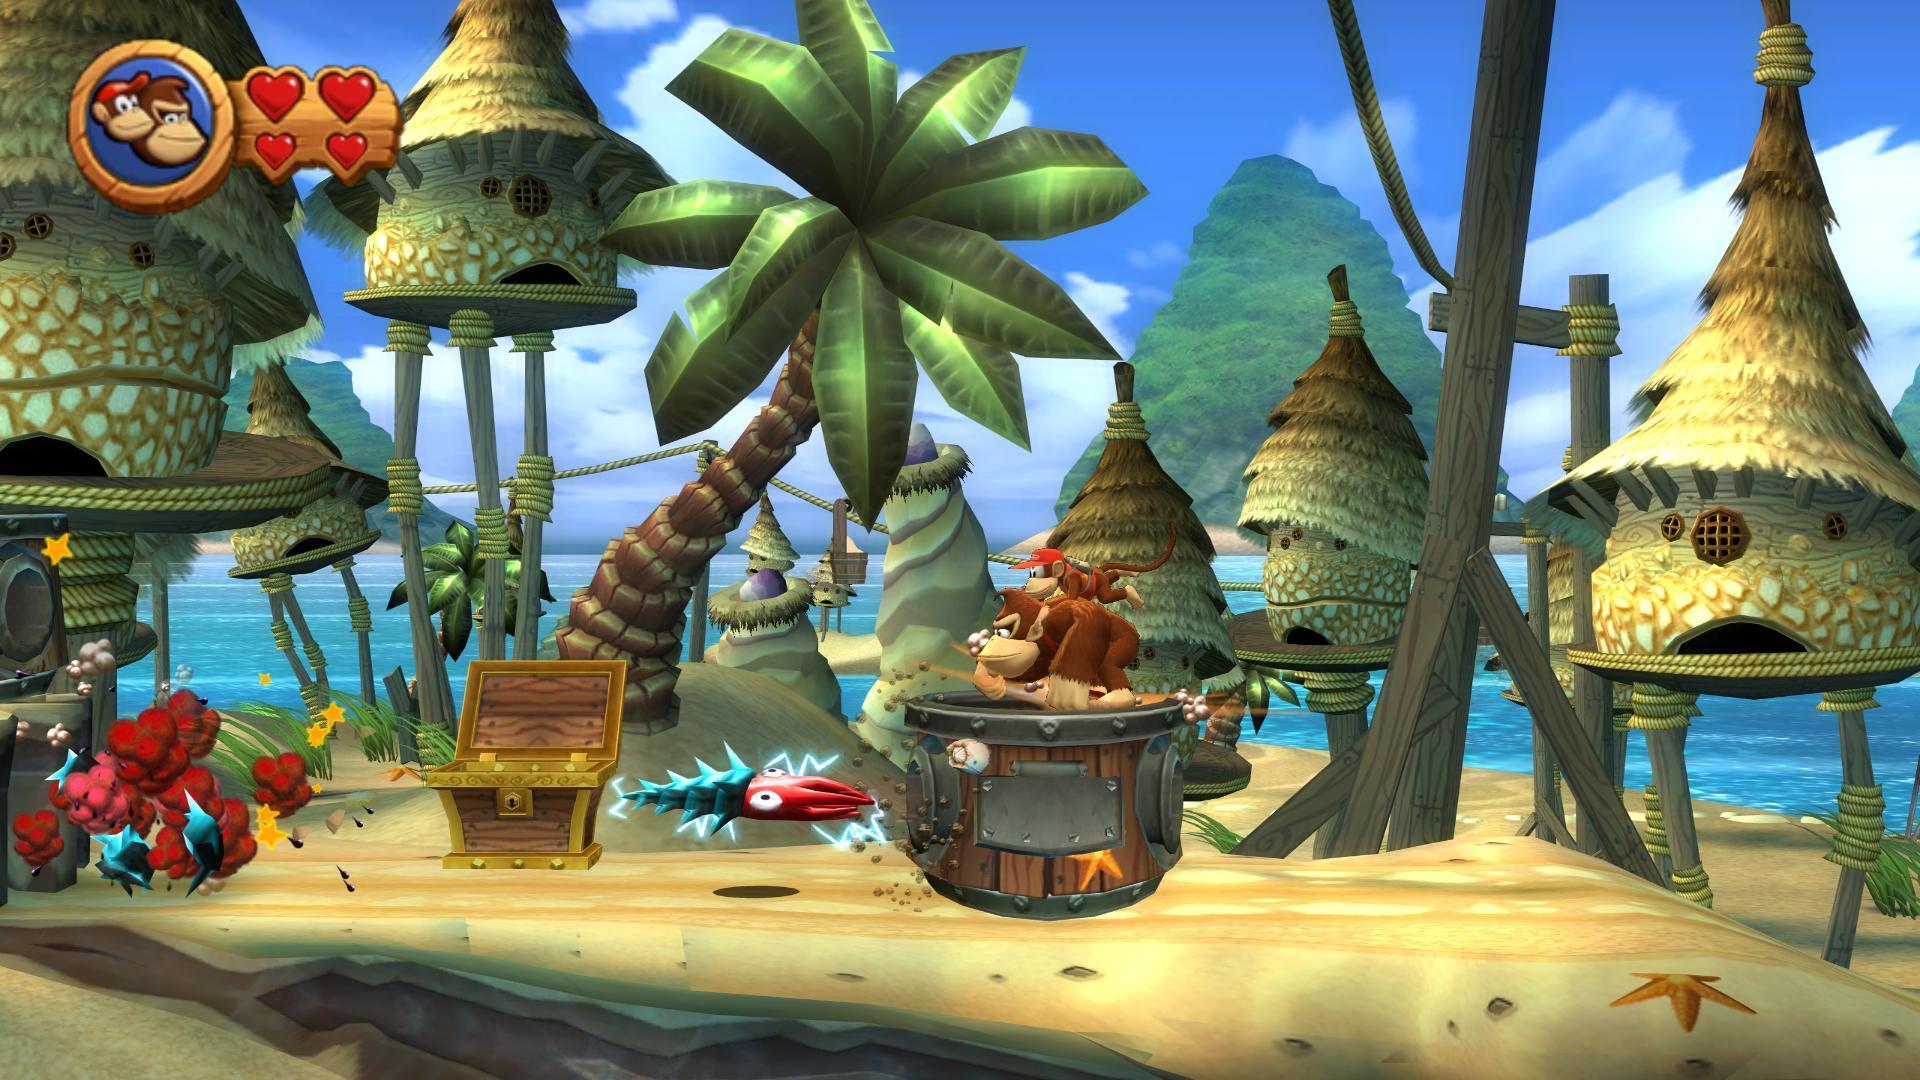 Video Game Donkey Kong Country Returns Wallpaper 1920x1080 px Free